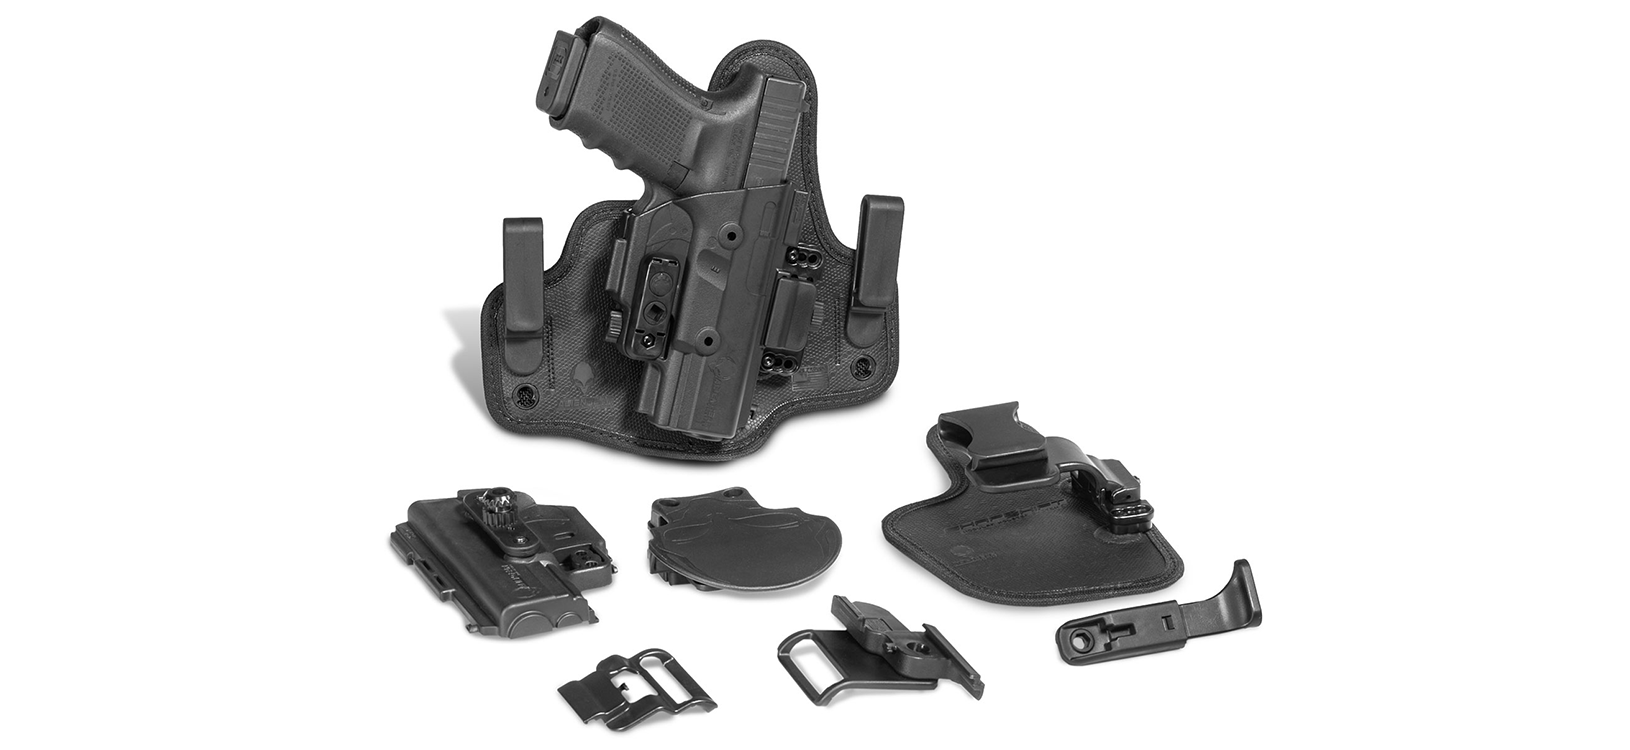 Gear Review: The All New ShapeShift Starter Kit From Alien Gear Holsters